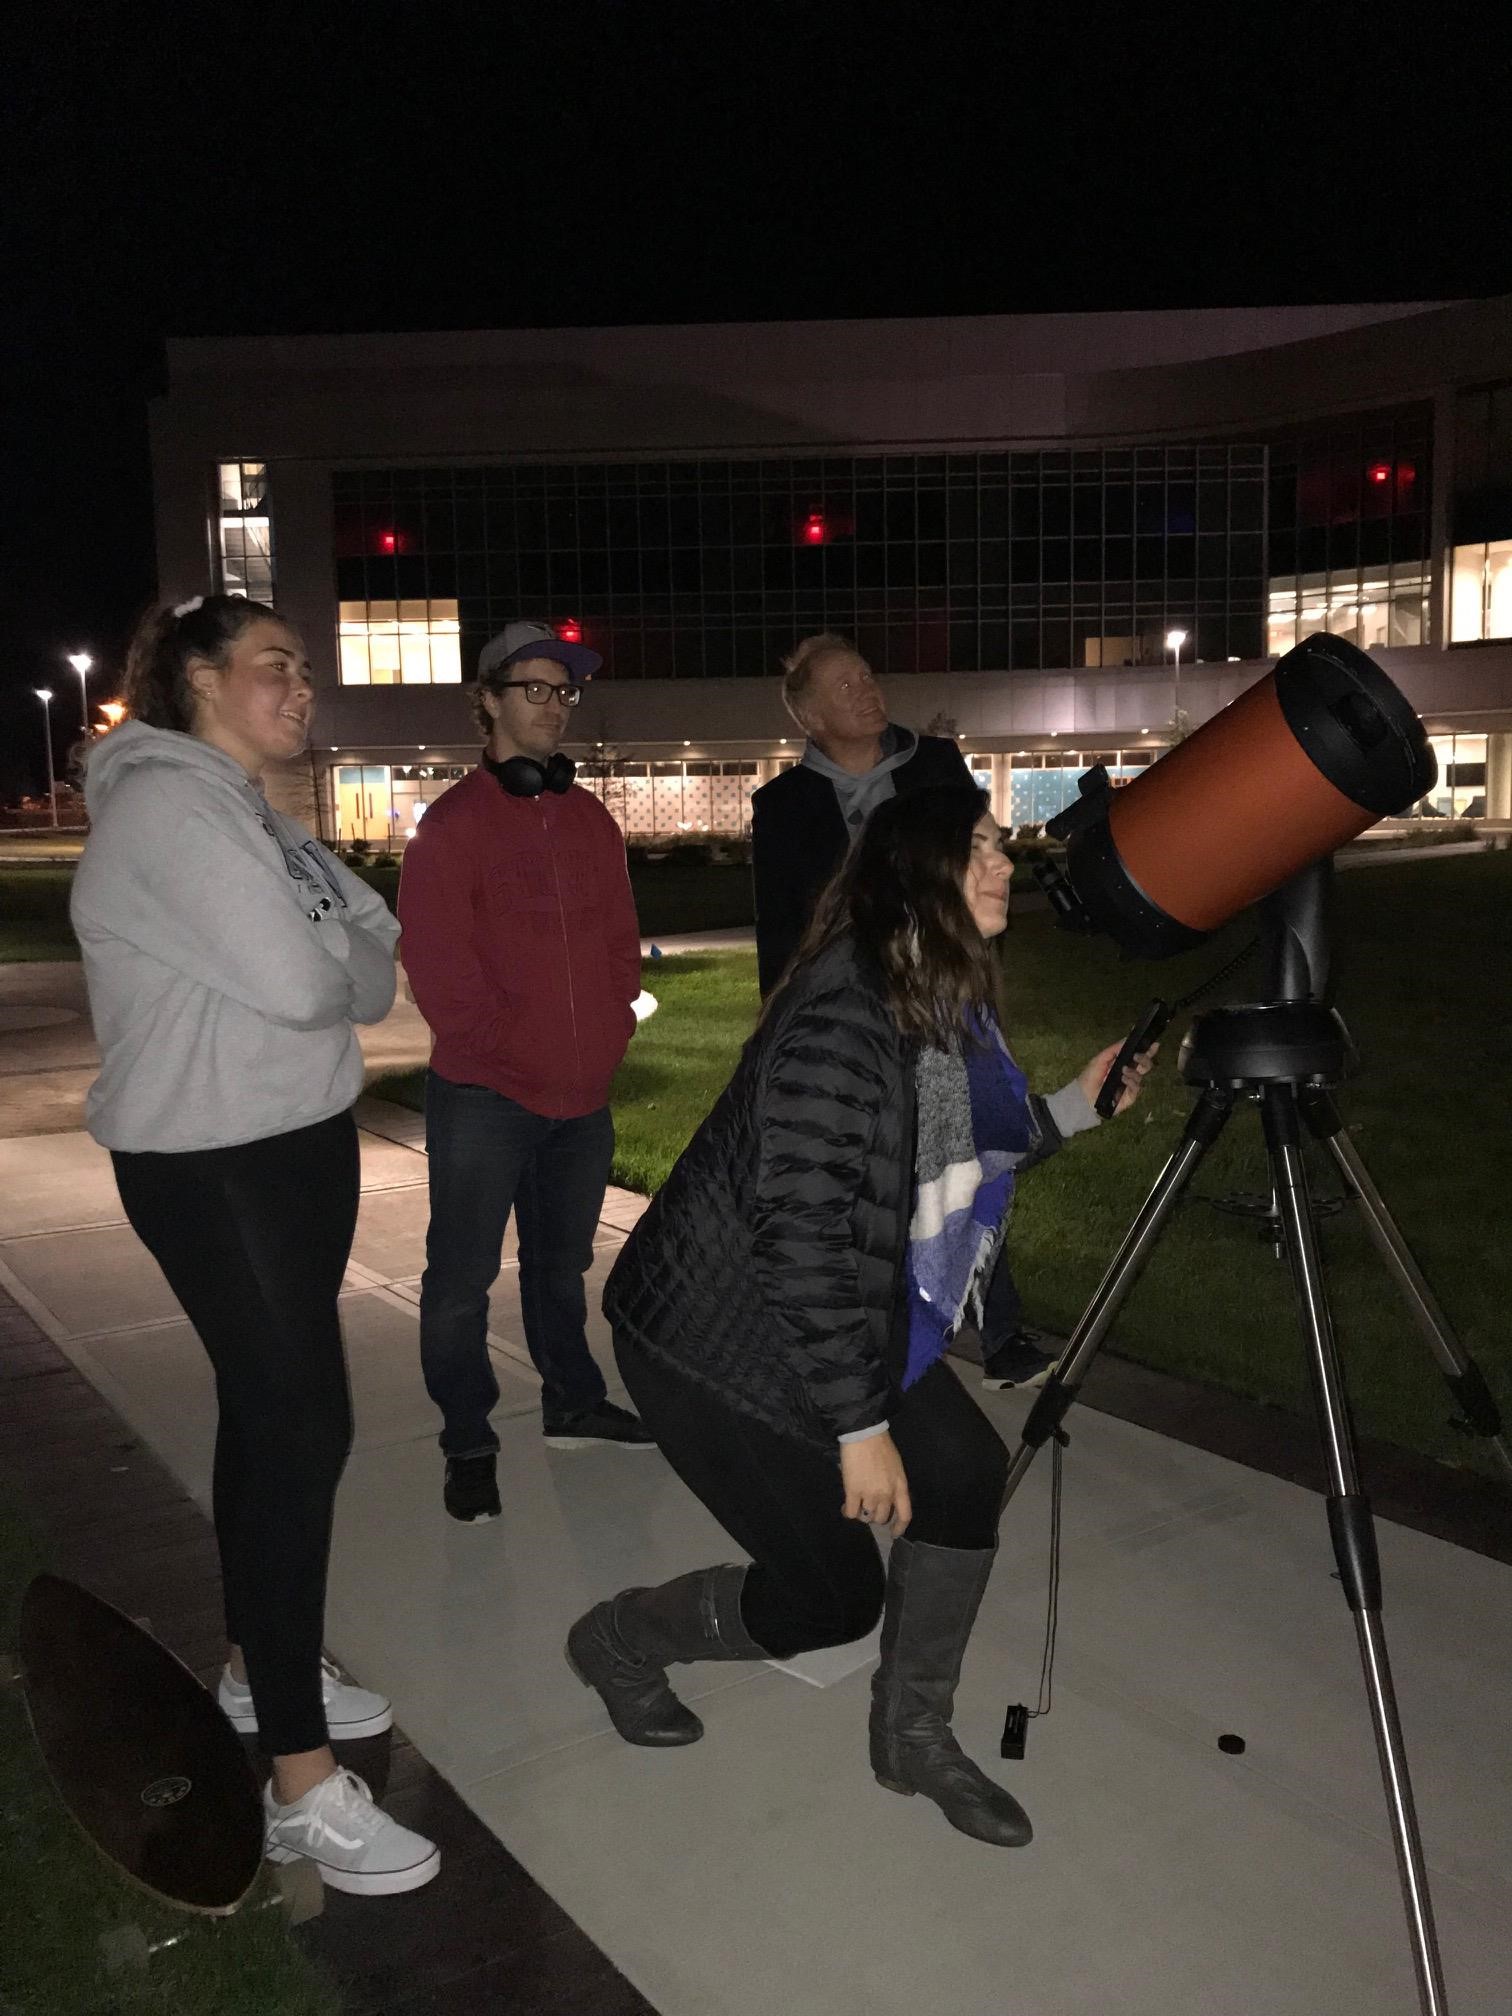 Image of Stockton University students viewing the night sky on campus.